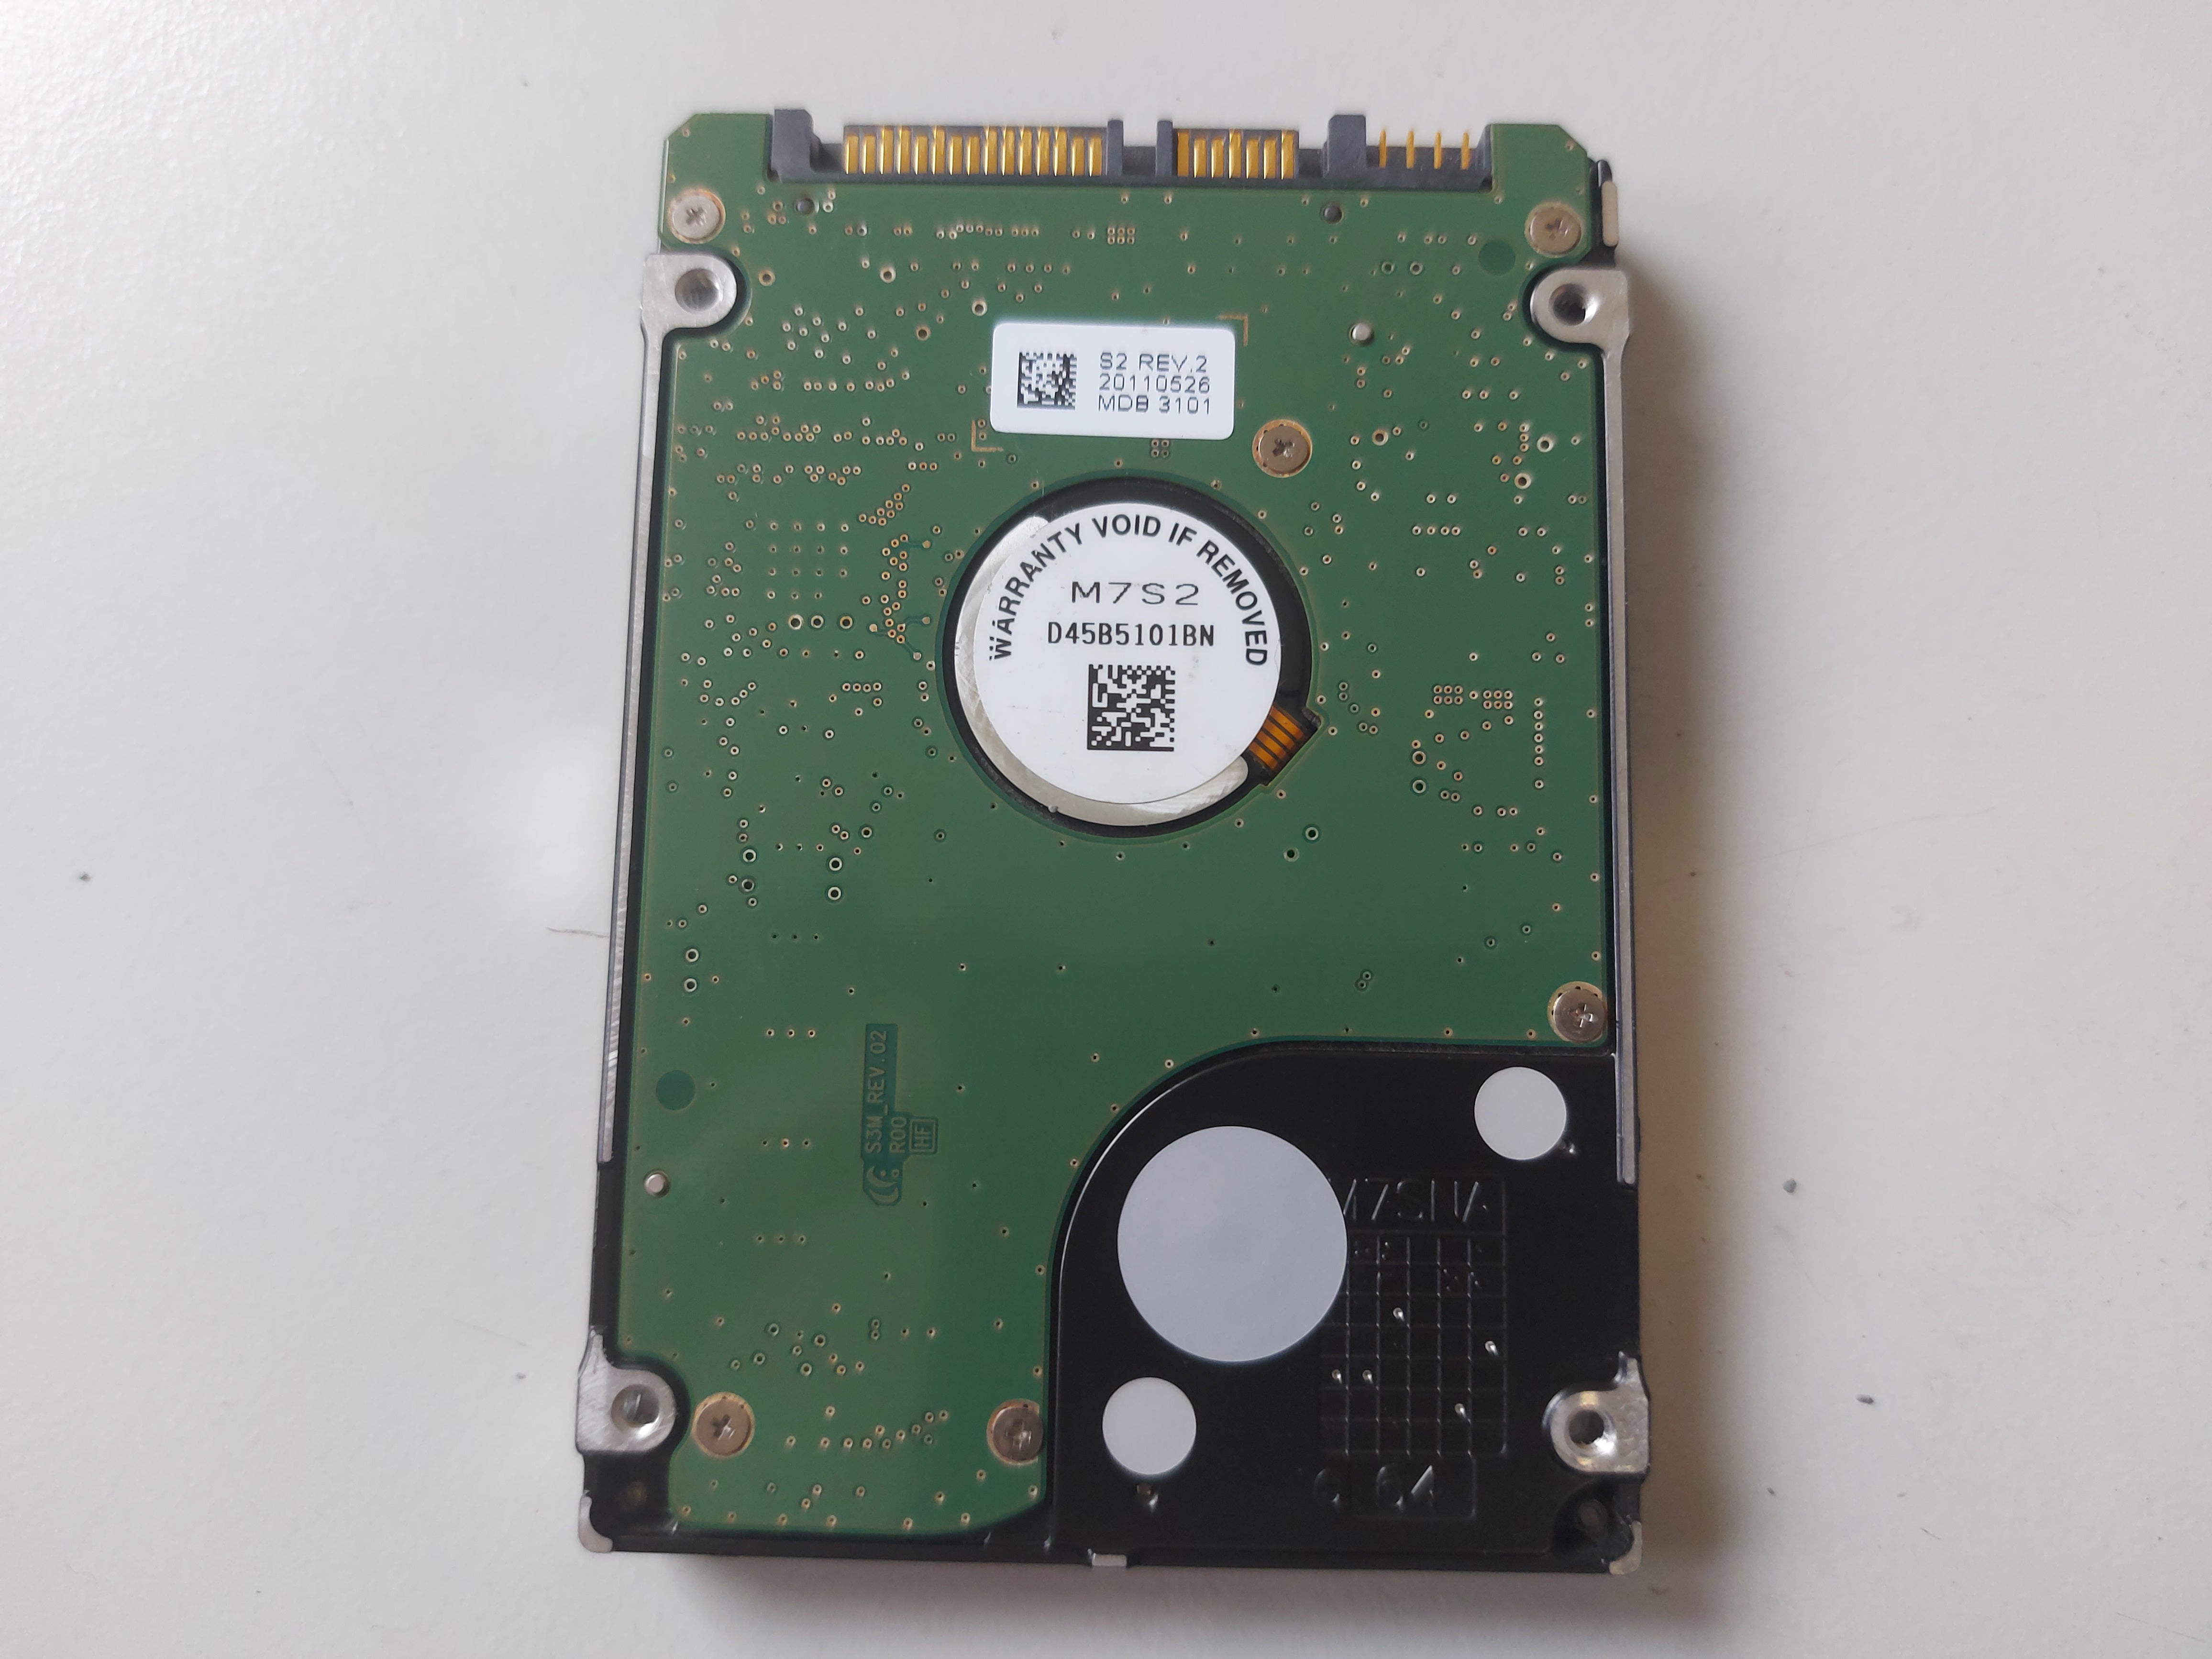 Samsung Spinpoint 160GB 5400rpm 2.5in SATA HDD ( HM161GI HM161GI/PRT ) USED